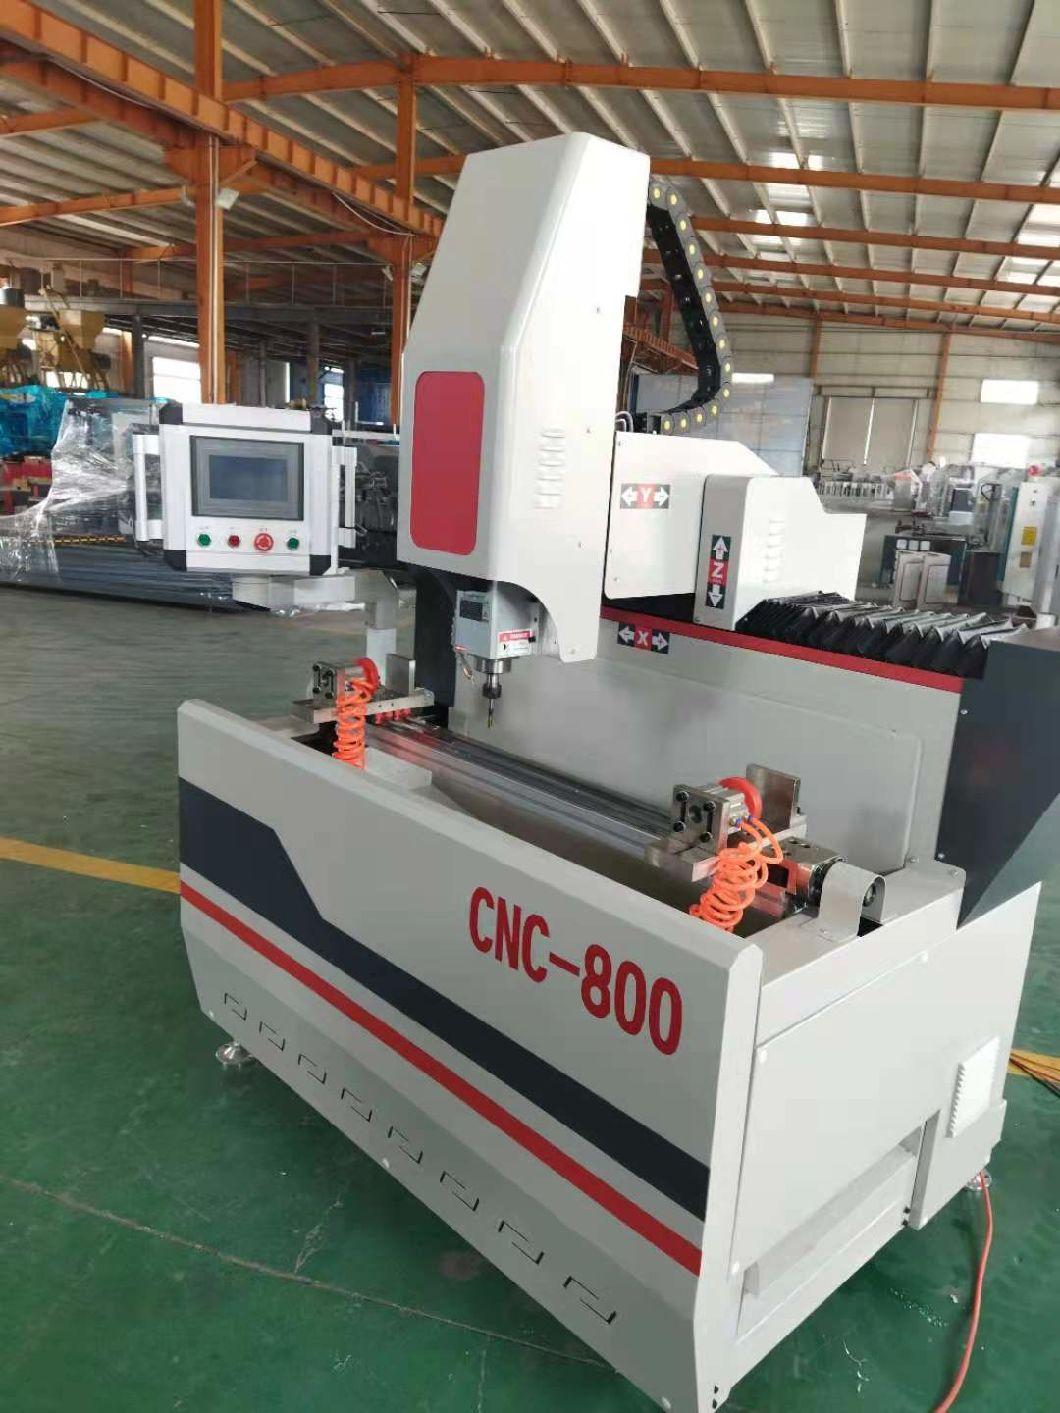 Lxf-CNC-800 CNC Drilling and Milling Machine for The Processing of Round Holes of Curtain Wall Aluminum Alloy Profiles for Doors and Windows Making